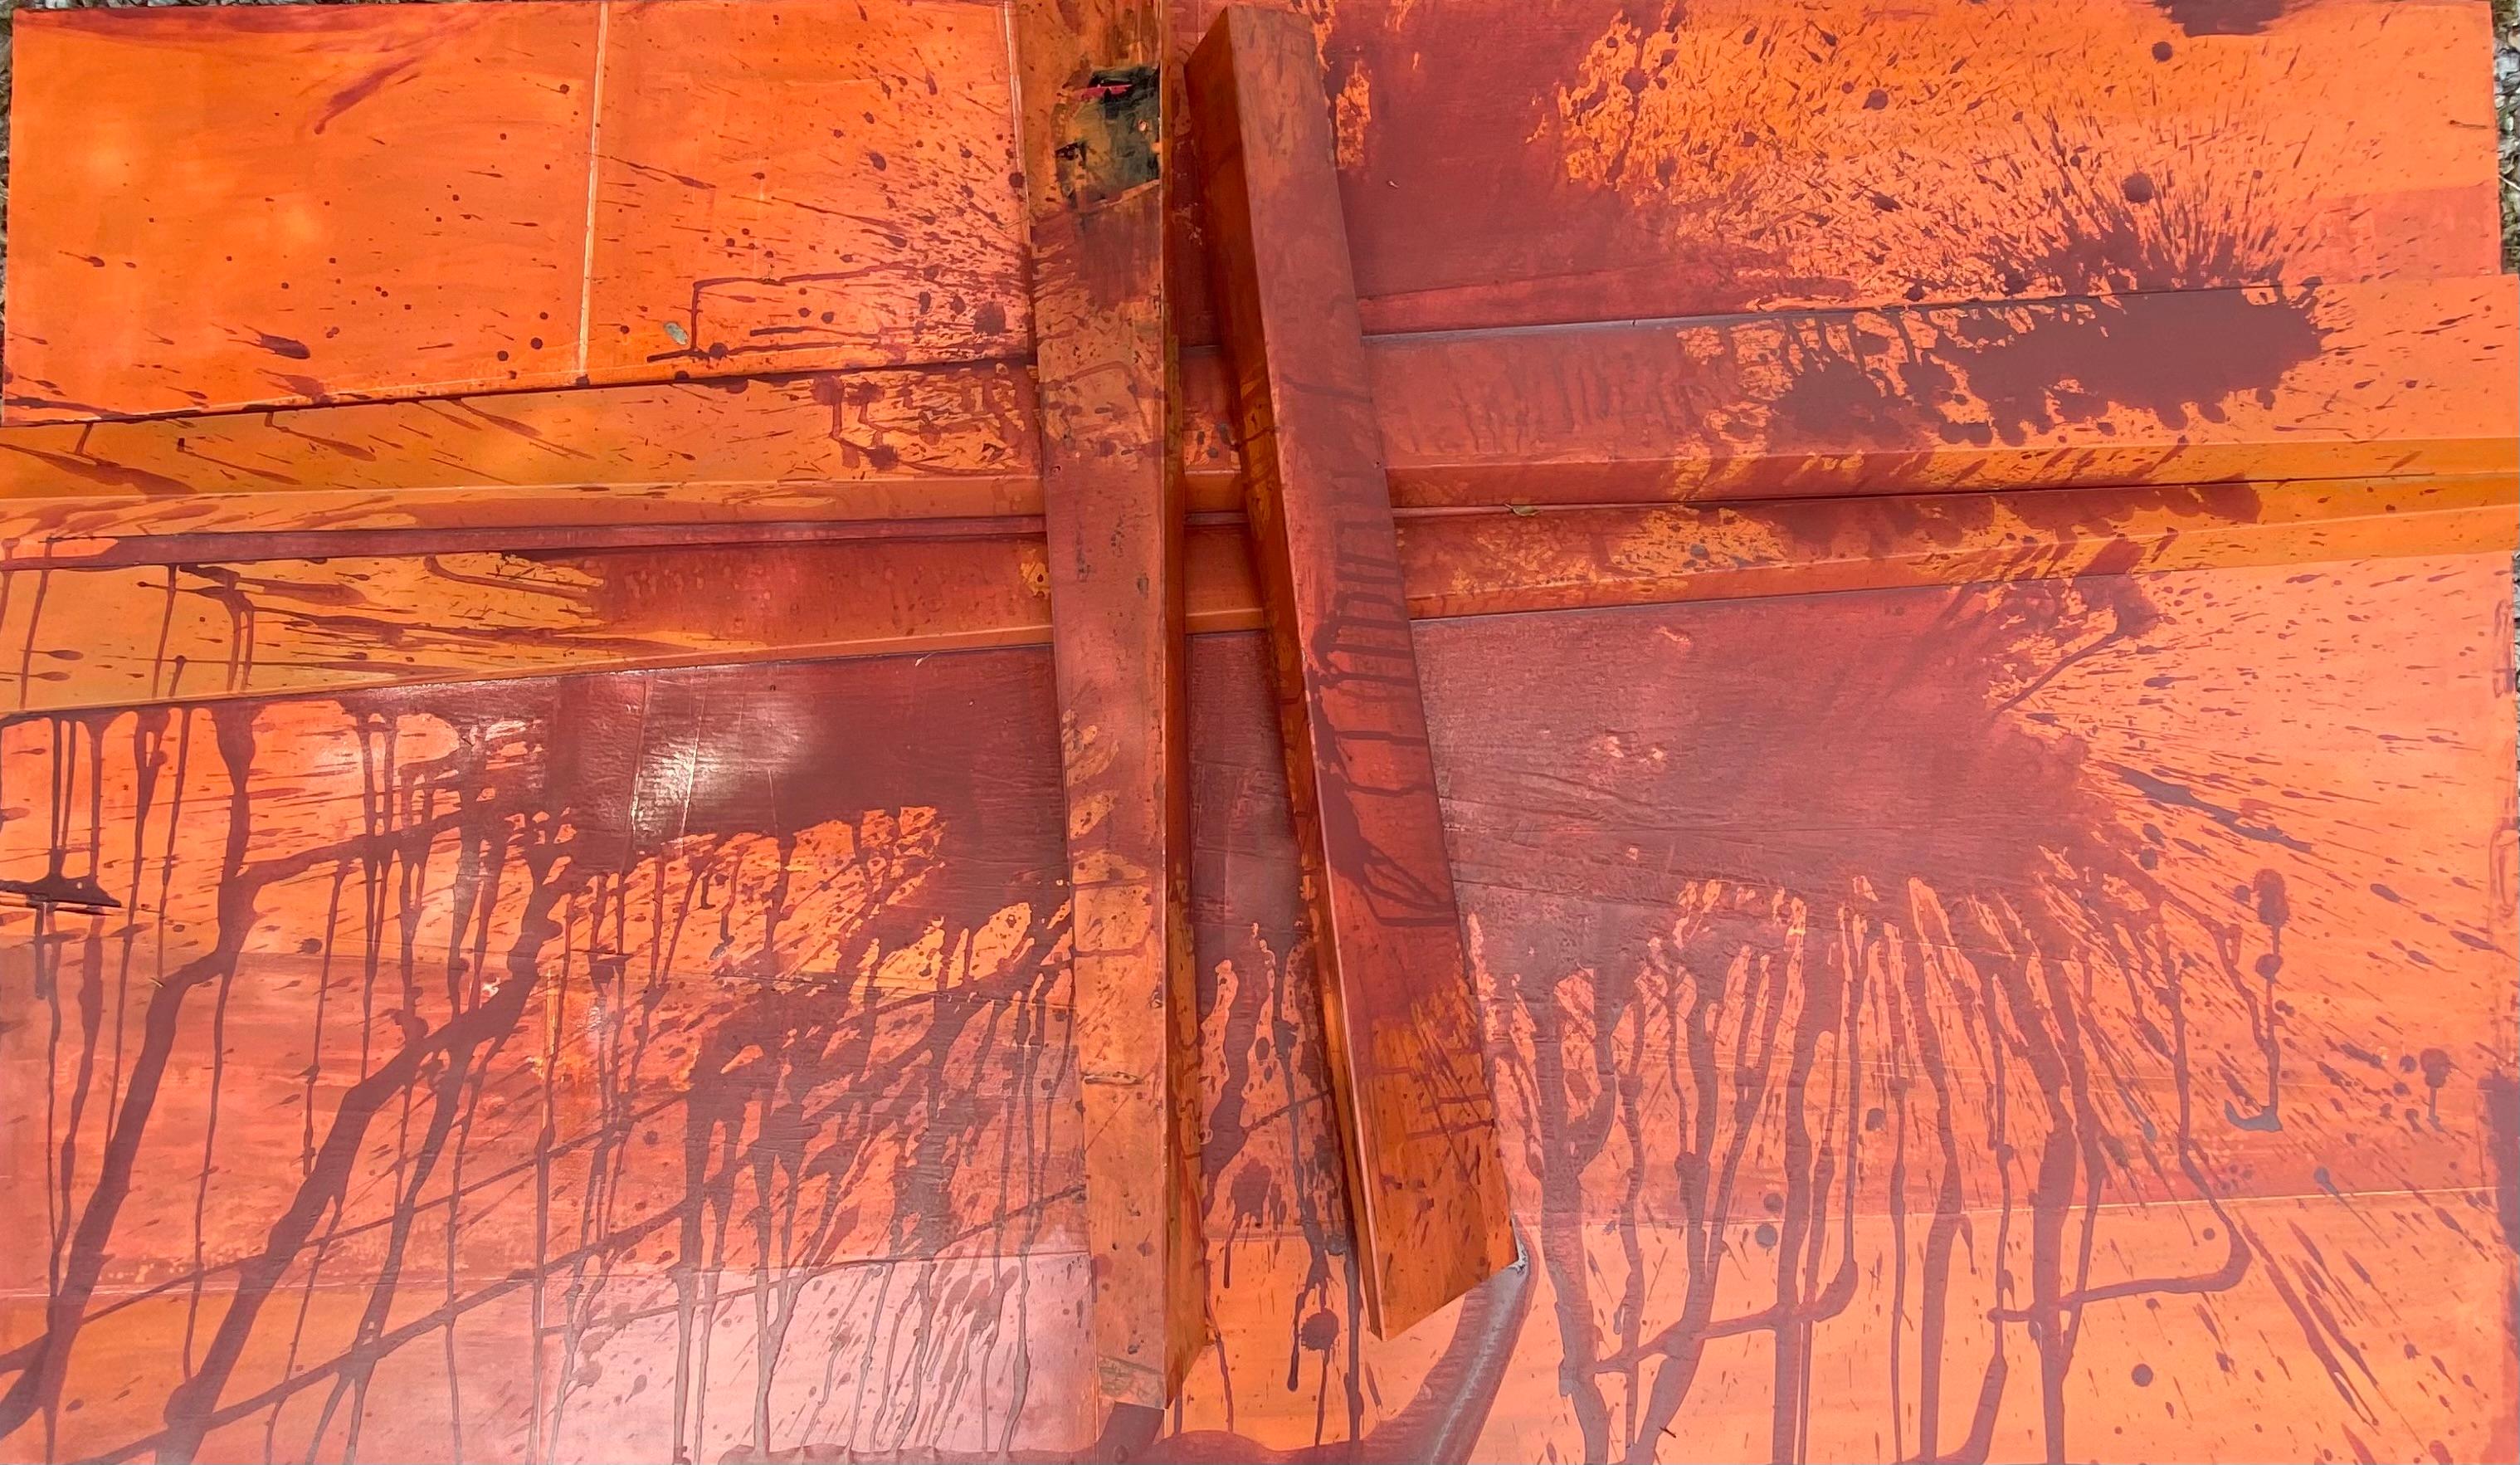 Oxydation III - Orange Abstract Painting by Jean-Pierre Rives